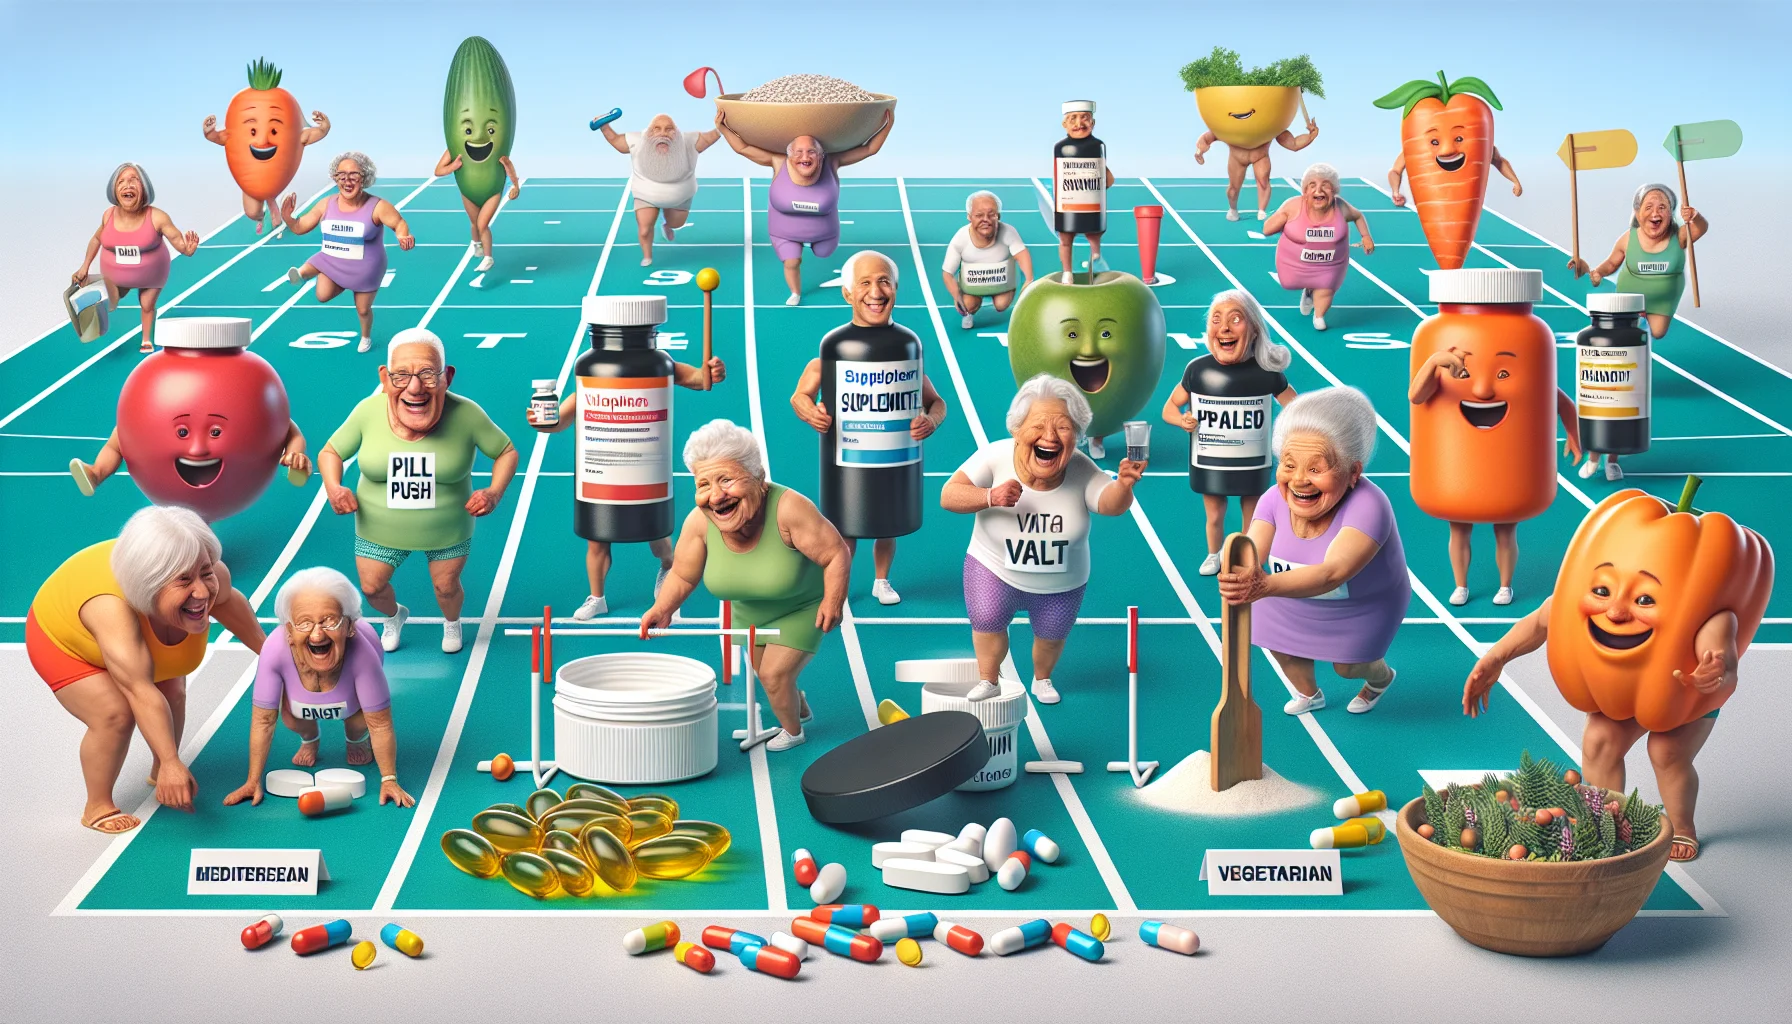 Create a humorous, realistic image depicting a joyful scenario involving a group of elderly women from various descents such as Black, Caucasian, Hispanic and South Asian. In this scene, they are participating in a 'Supplement Olympics'. Make all of them engaging in fun athletic events like 'pill push', an elderly version of shot put but with supplement bottles, or 'vitamin vault', a joyful interpretation of pole vaulting using oversized fish oil capsules. All around them, food mascots showcasing various diets like the Mediterranean, paleo, and vegetarian cater cheerfully. Also, visualize them enjoying a laughing conversation about the hilarious novelty of incorporating diet supplements into athletics to highlight the importance of nutrition in older adulthood.